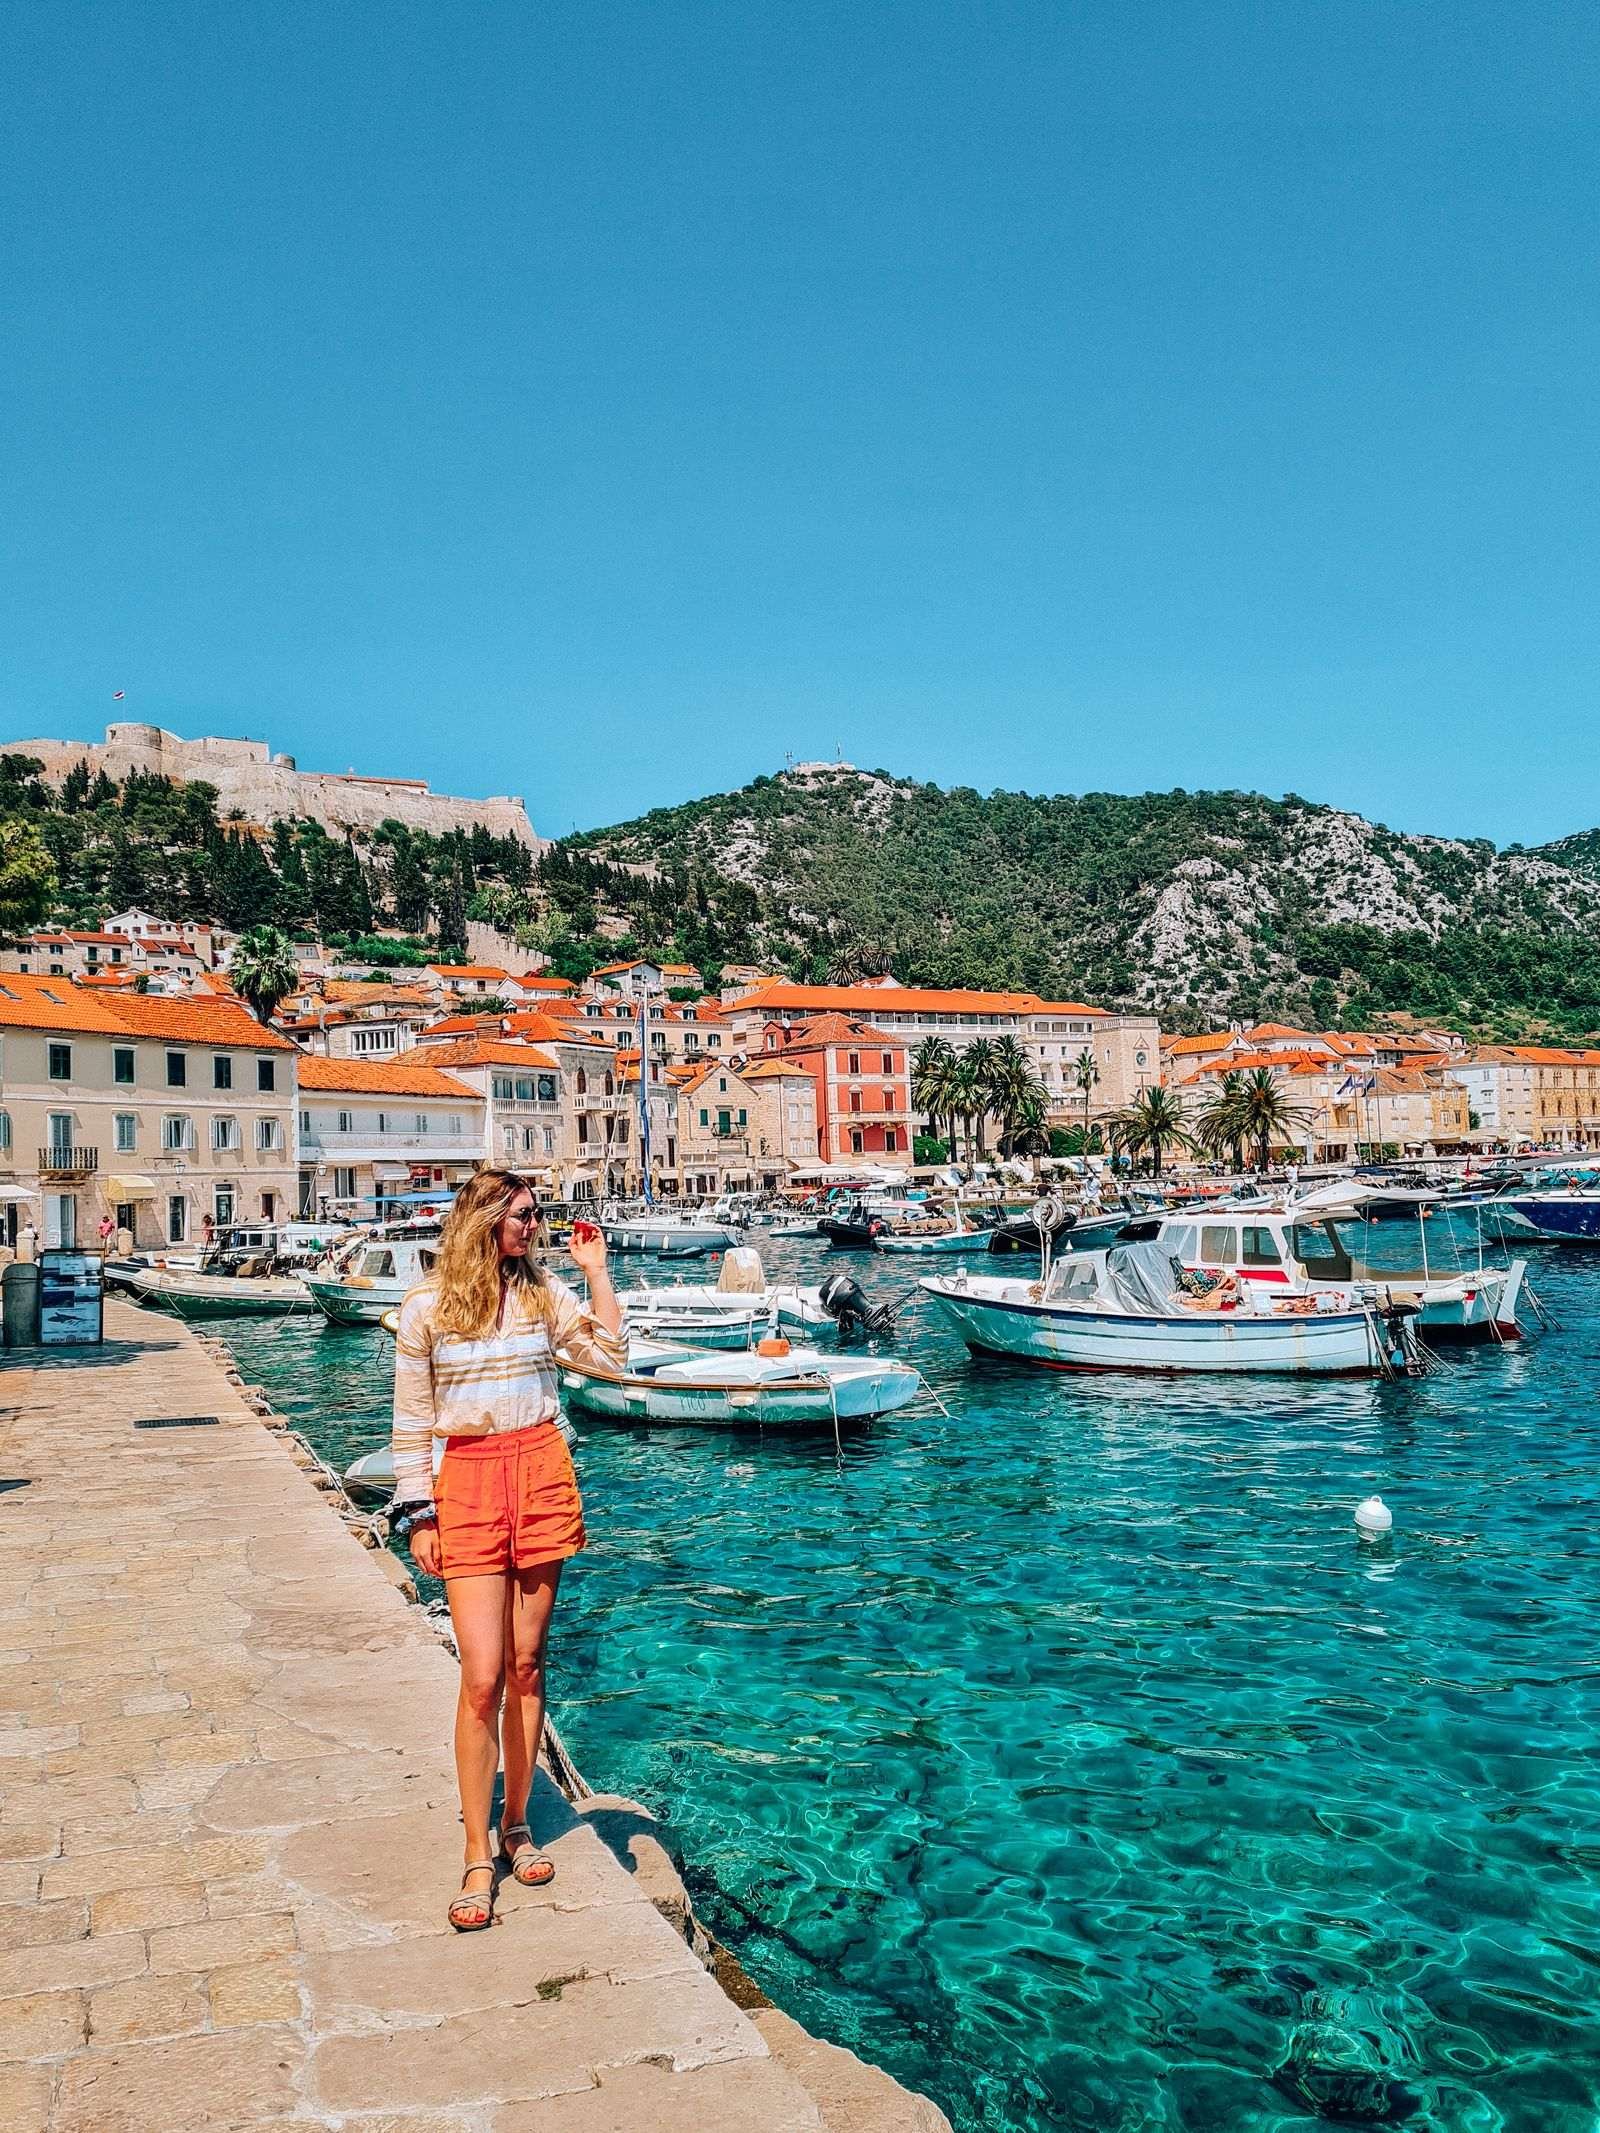 A girl in orange shorts standing on the edge of the clear blue harbour of Hvar with many white boats and stone buildings in the background